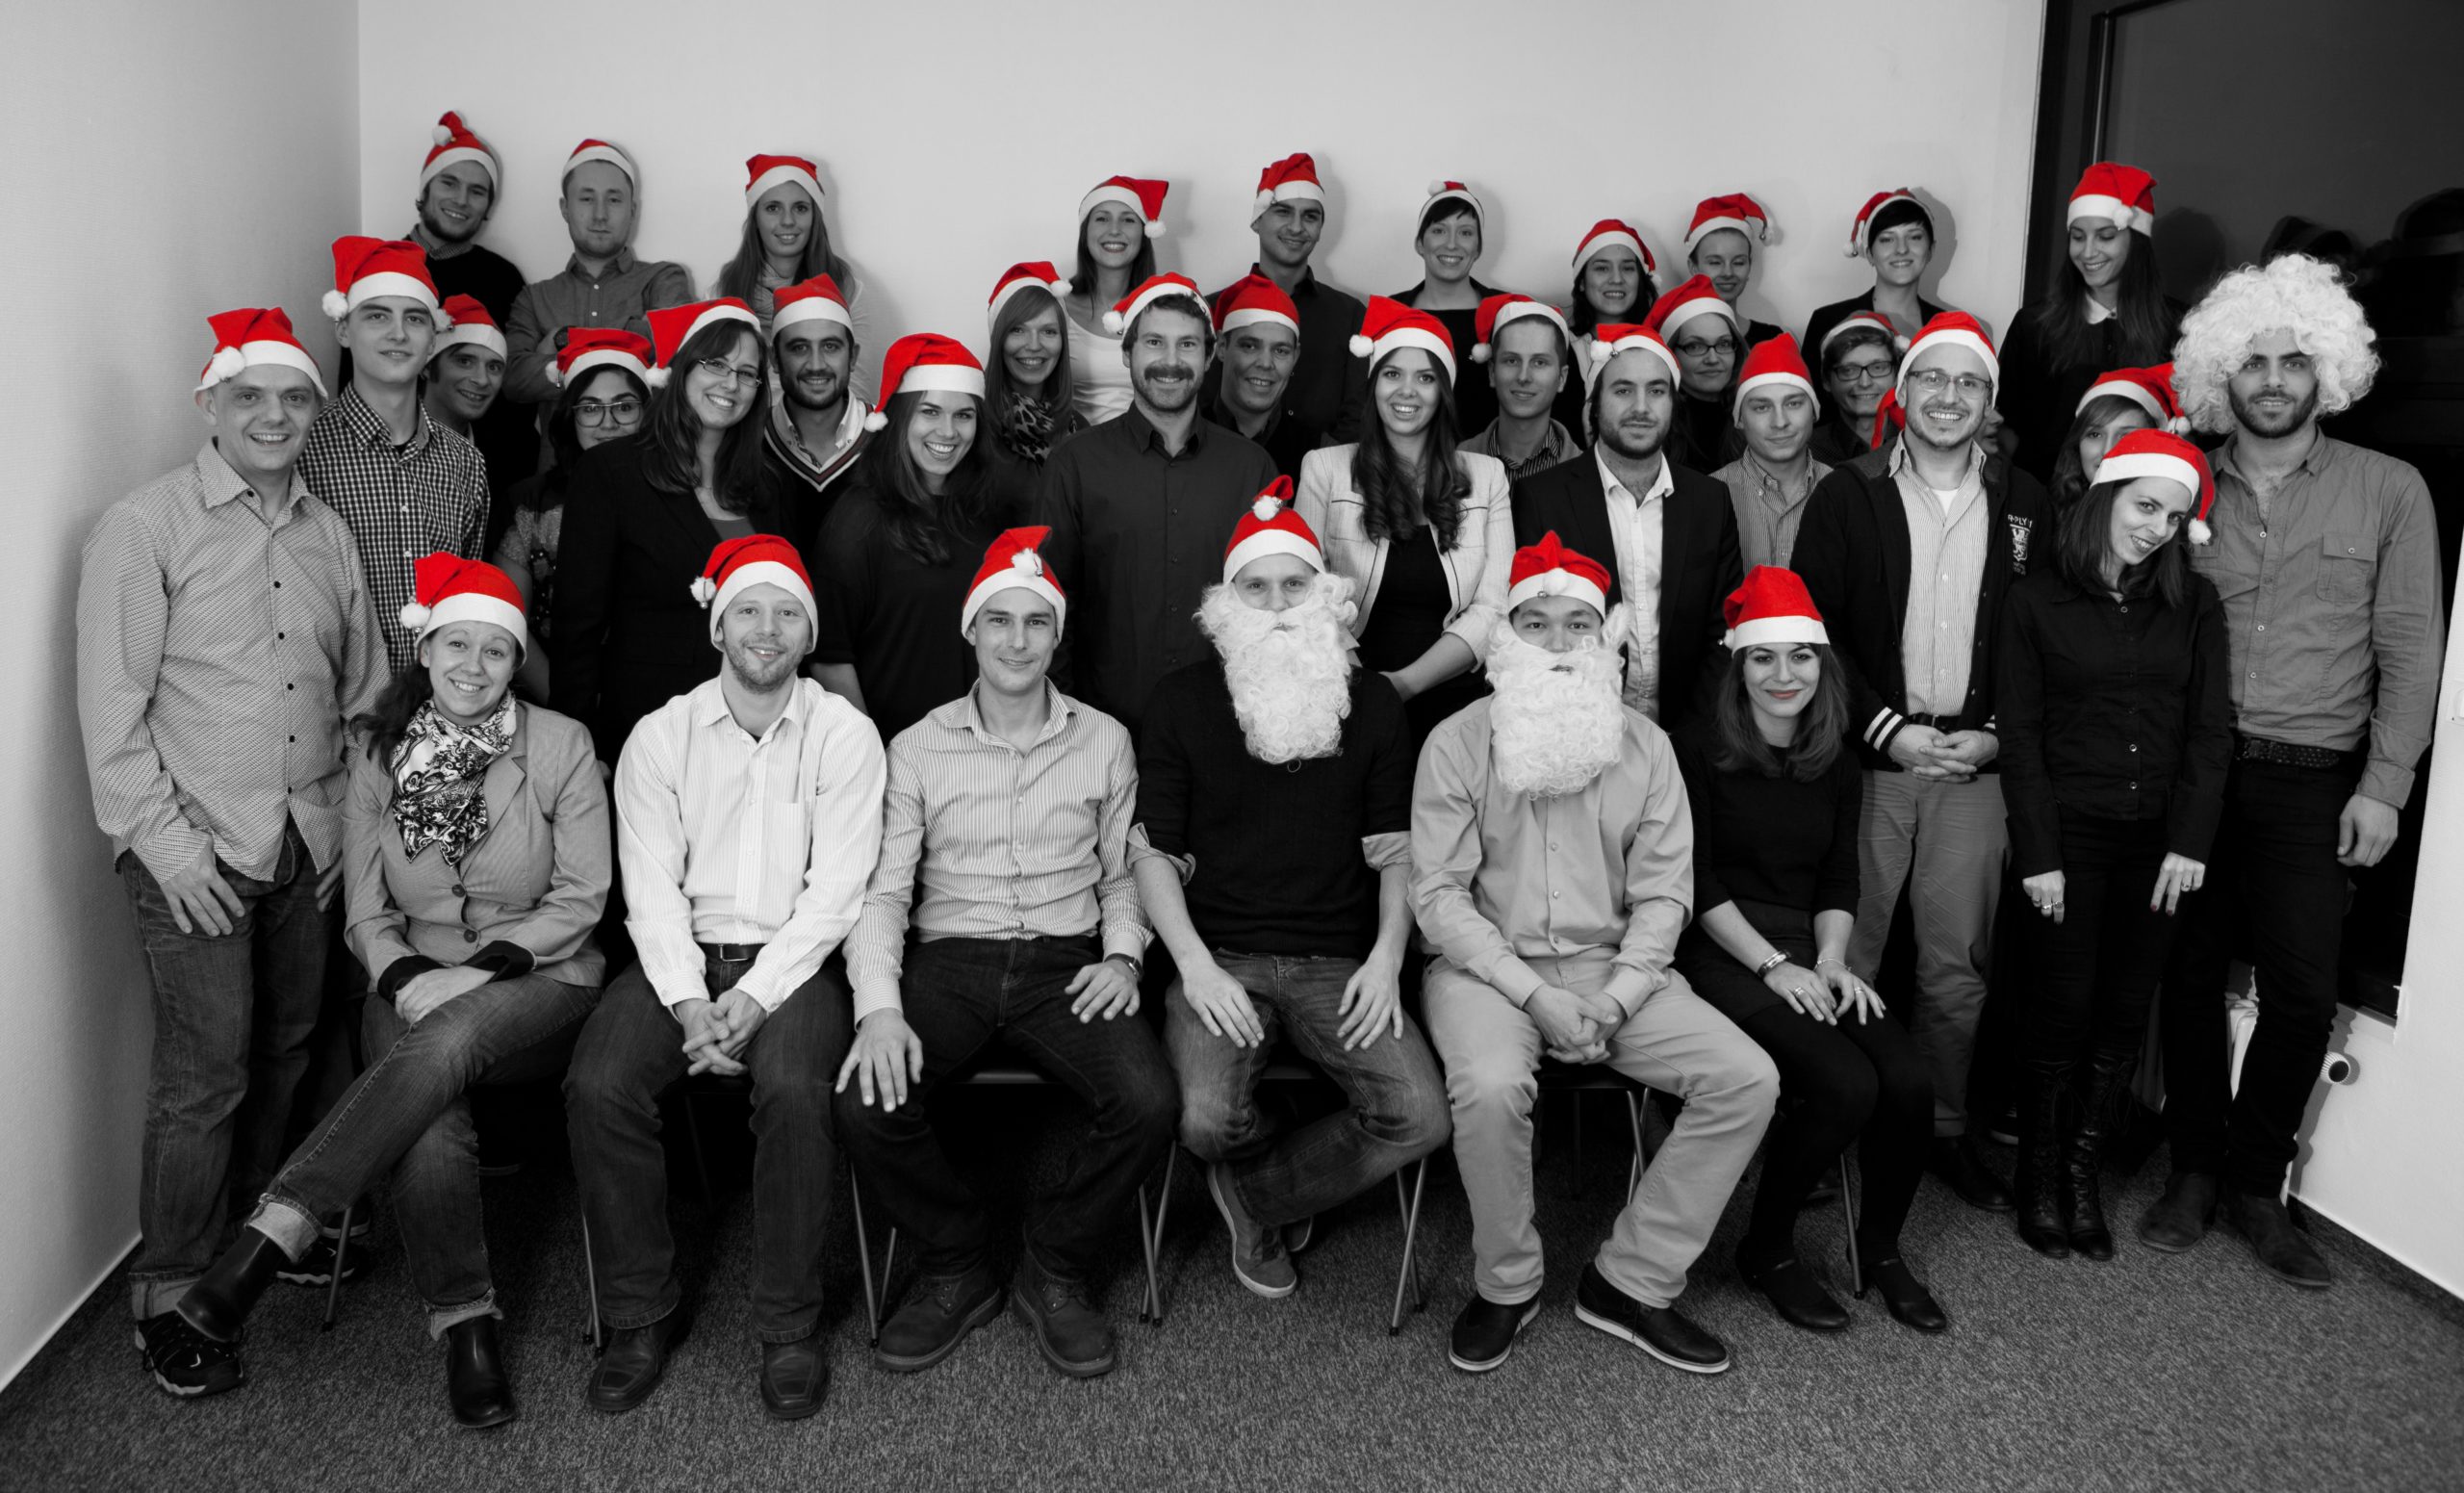 Merry Christmas from the Customer Alliance team